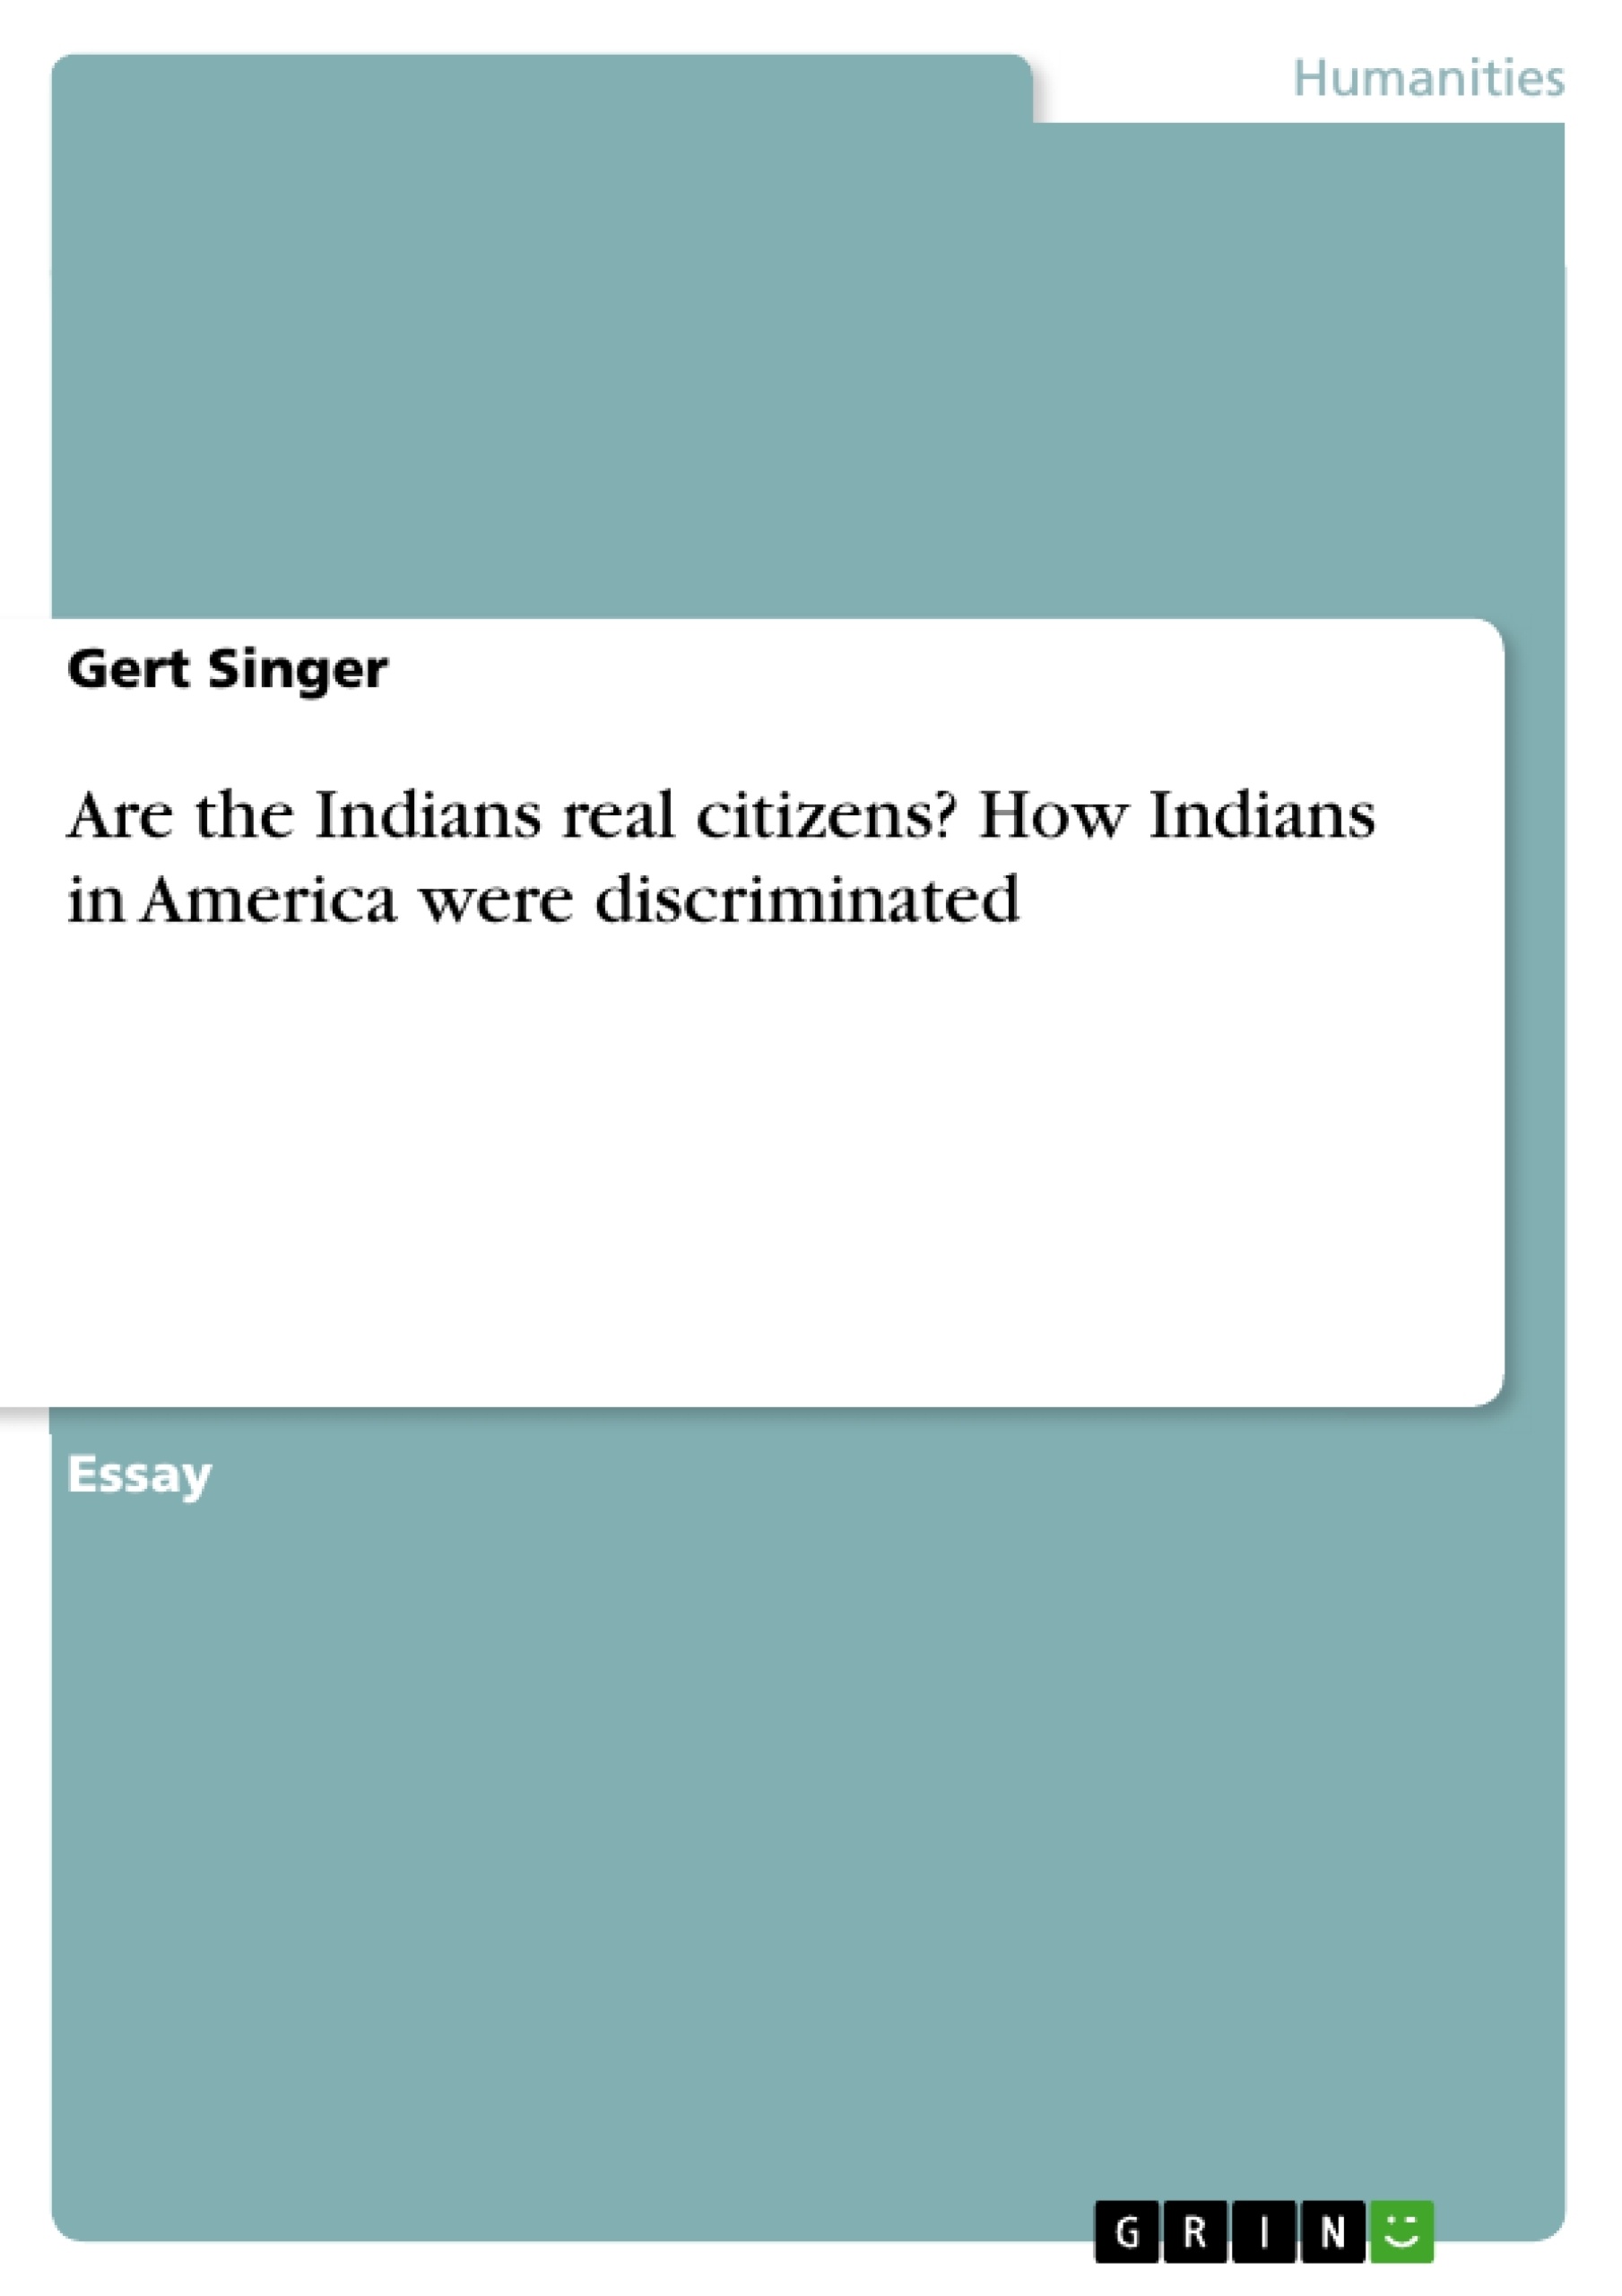 Title: Are the Indians real citizens? How Indians in America were discriminated